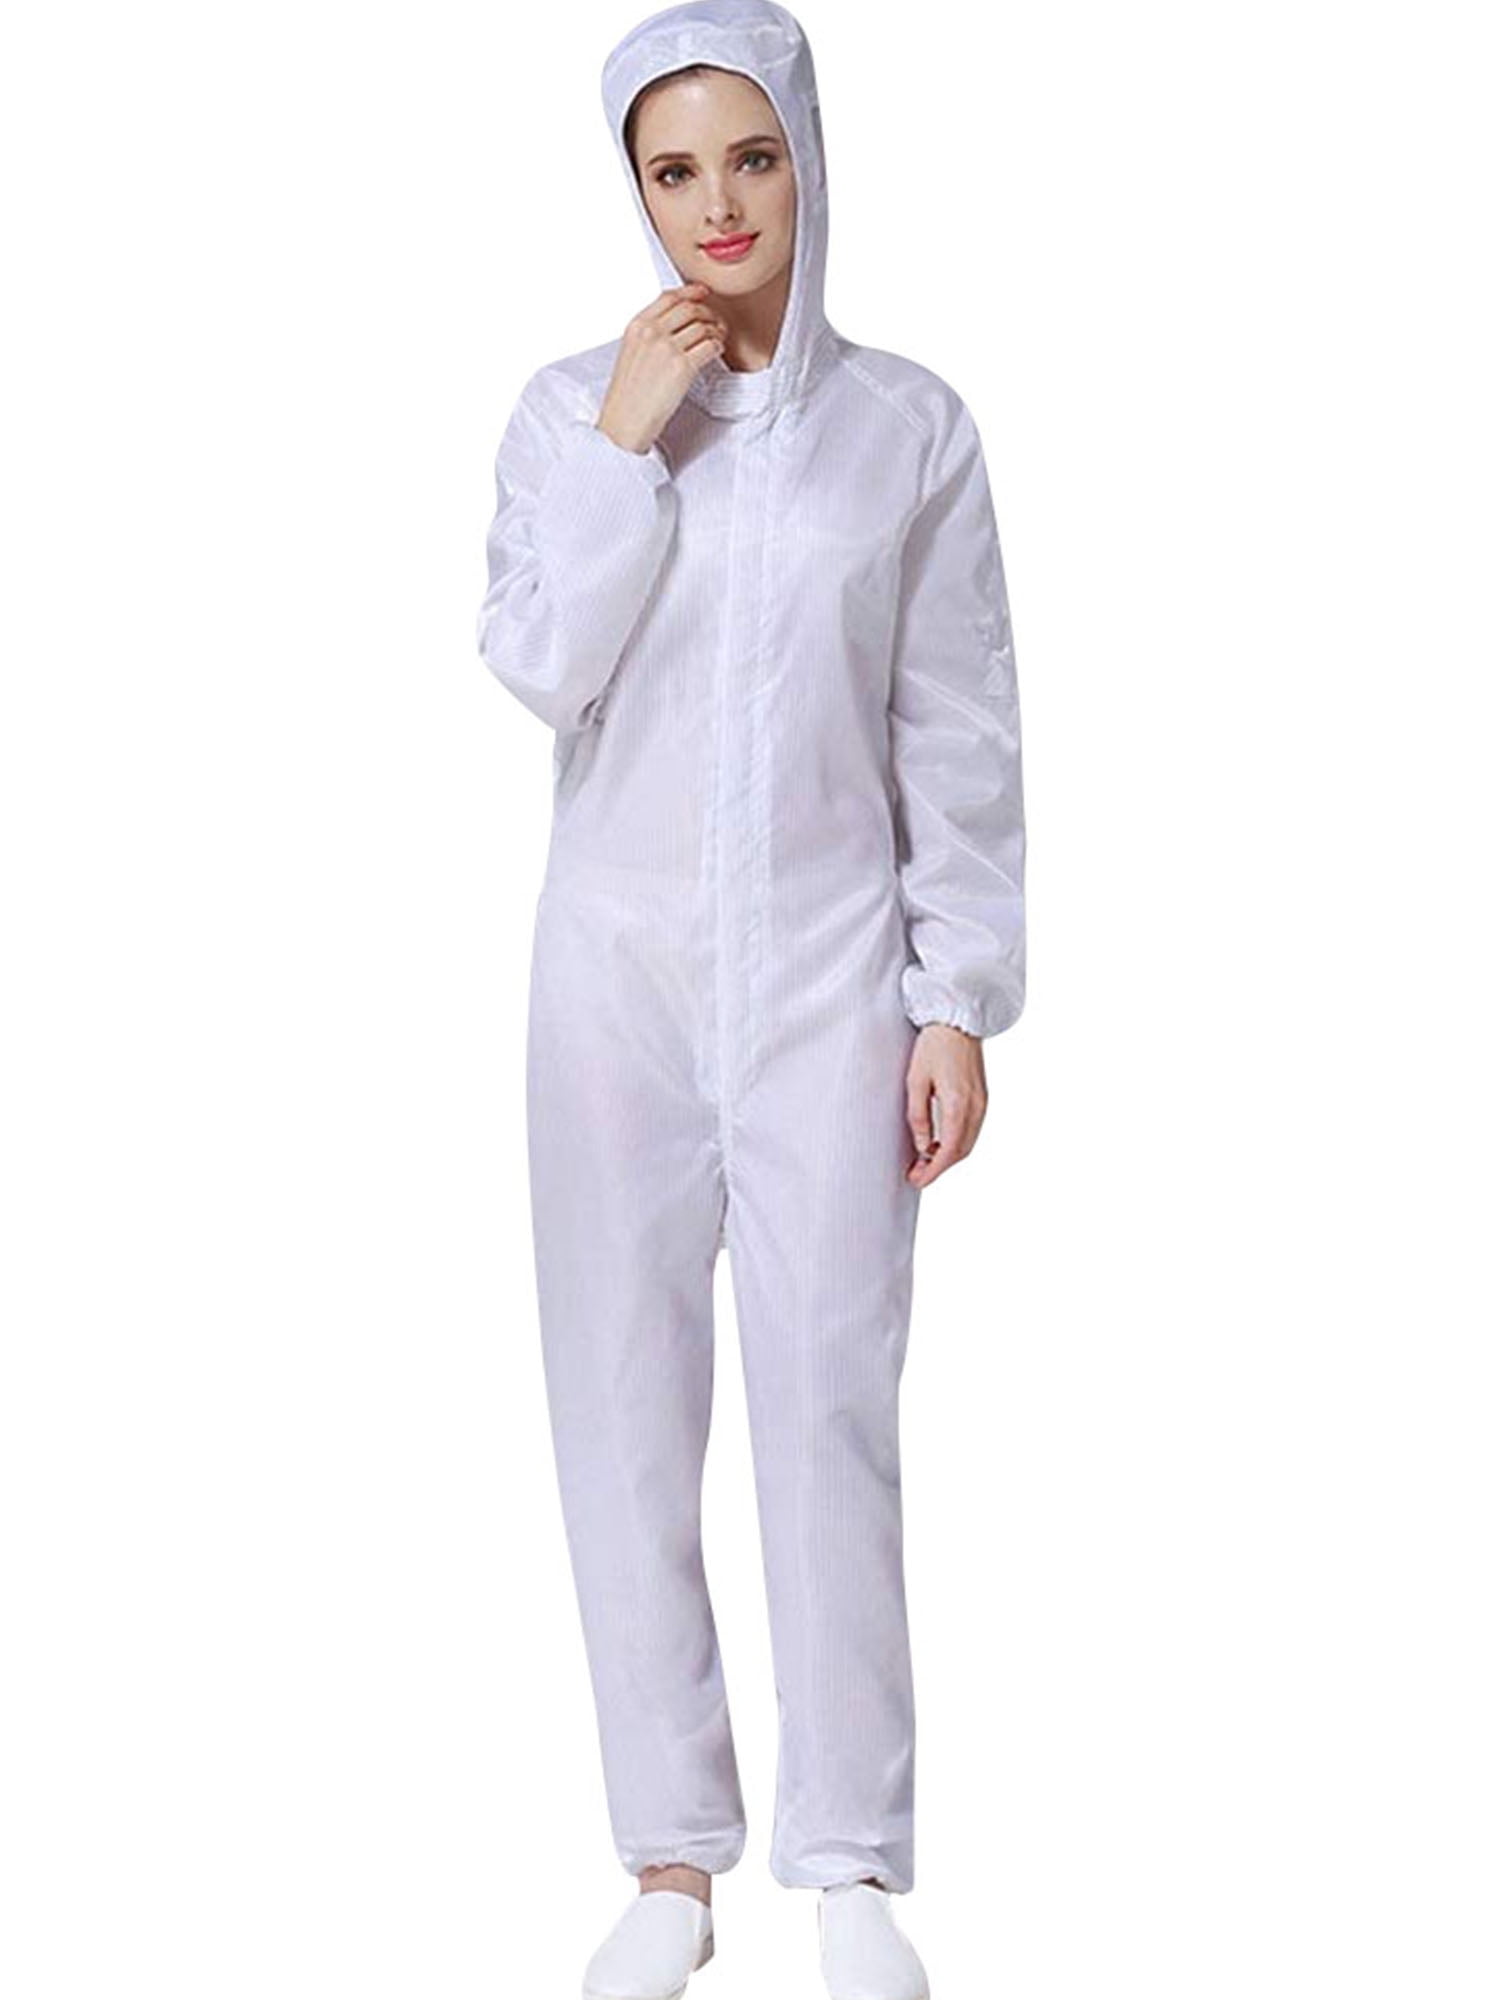 Polyester Dust-Proof and Anti-Static Work Coverall for Women Men S-3XL ChYoung Plus Size Reusable Protective Hooded